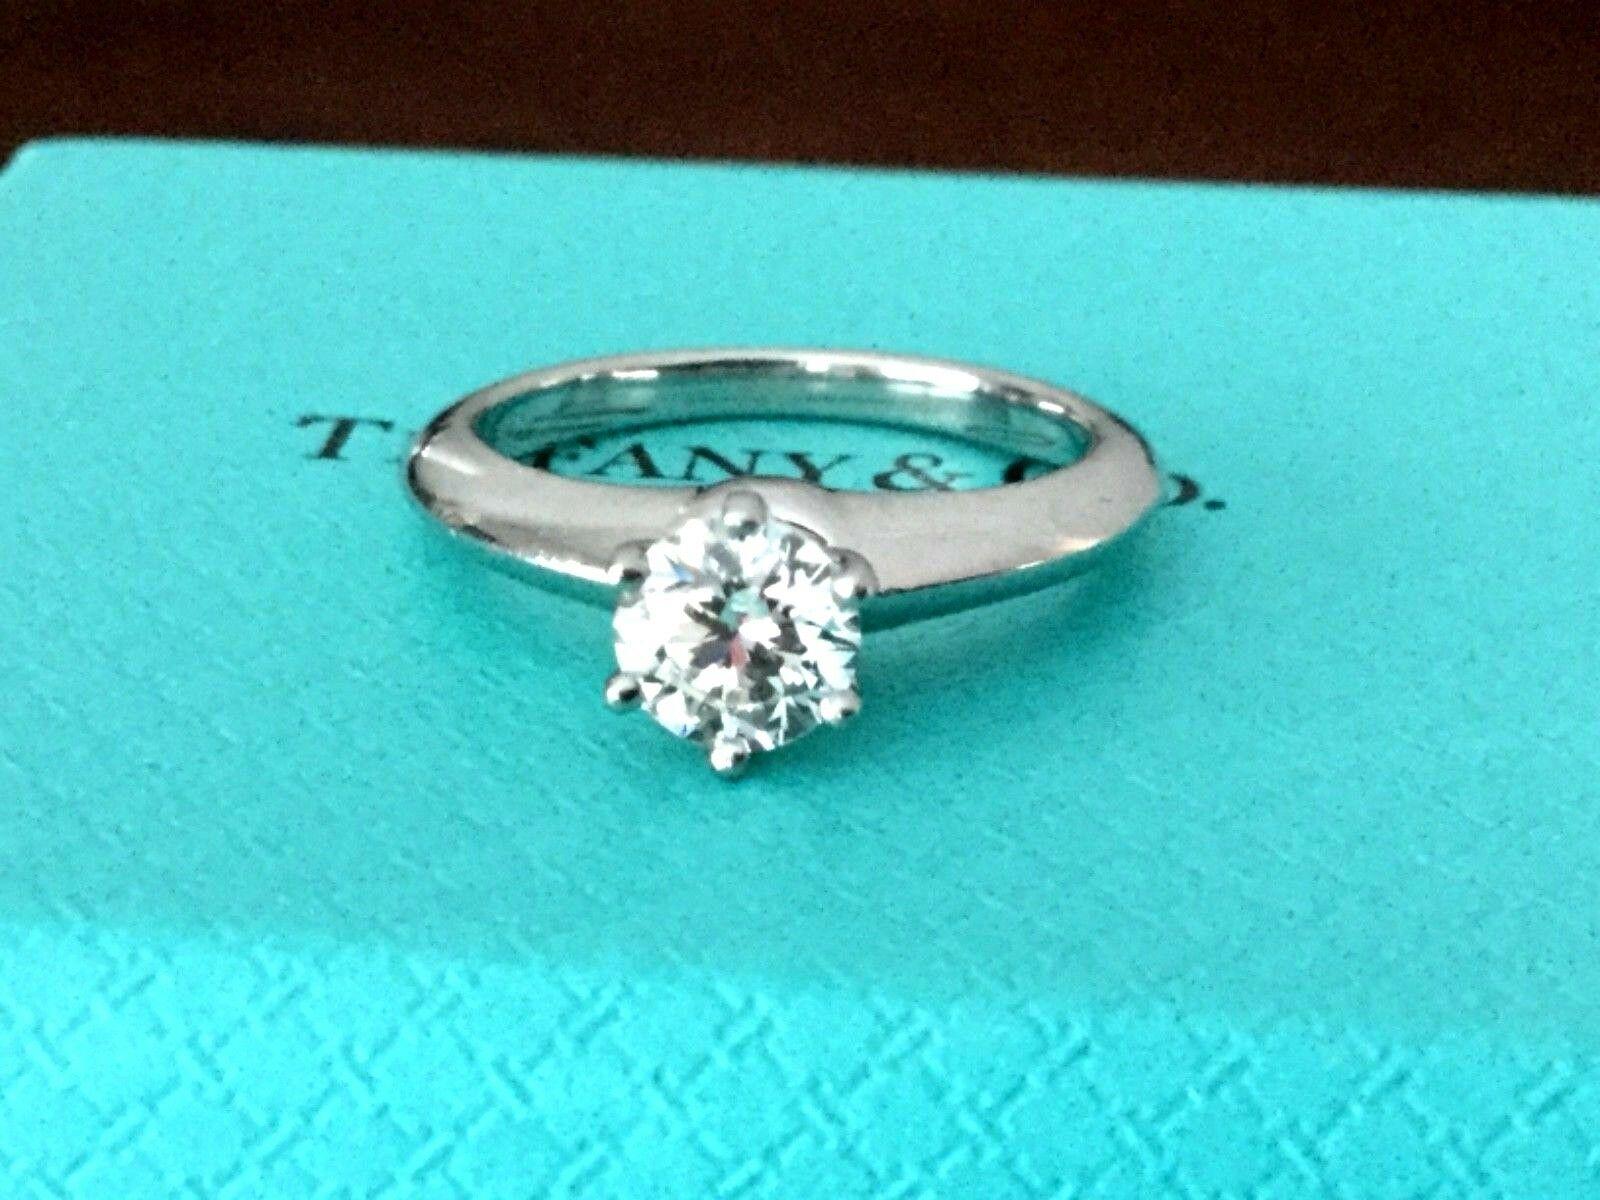 Being offered for your consideration is a like new Tiffany & Co Platinum and Diamond .62 carat natural round engagement ring set in the classic 6 prong setting. 

The ring was purchased in 2015 for $5,562 inc tax and currently retails for $7,000 USD